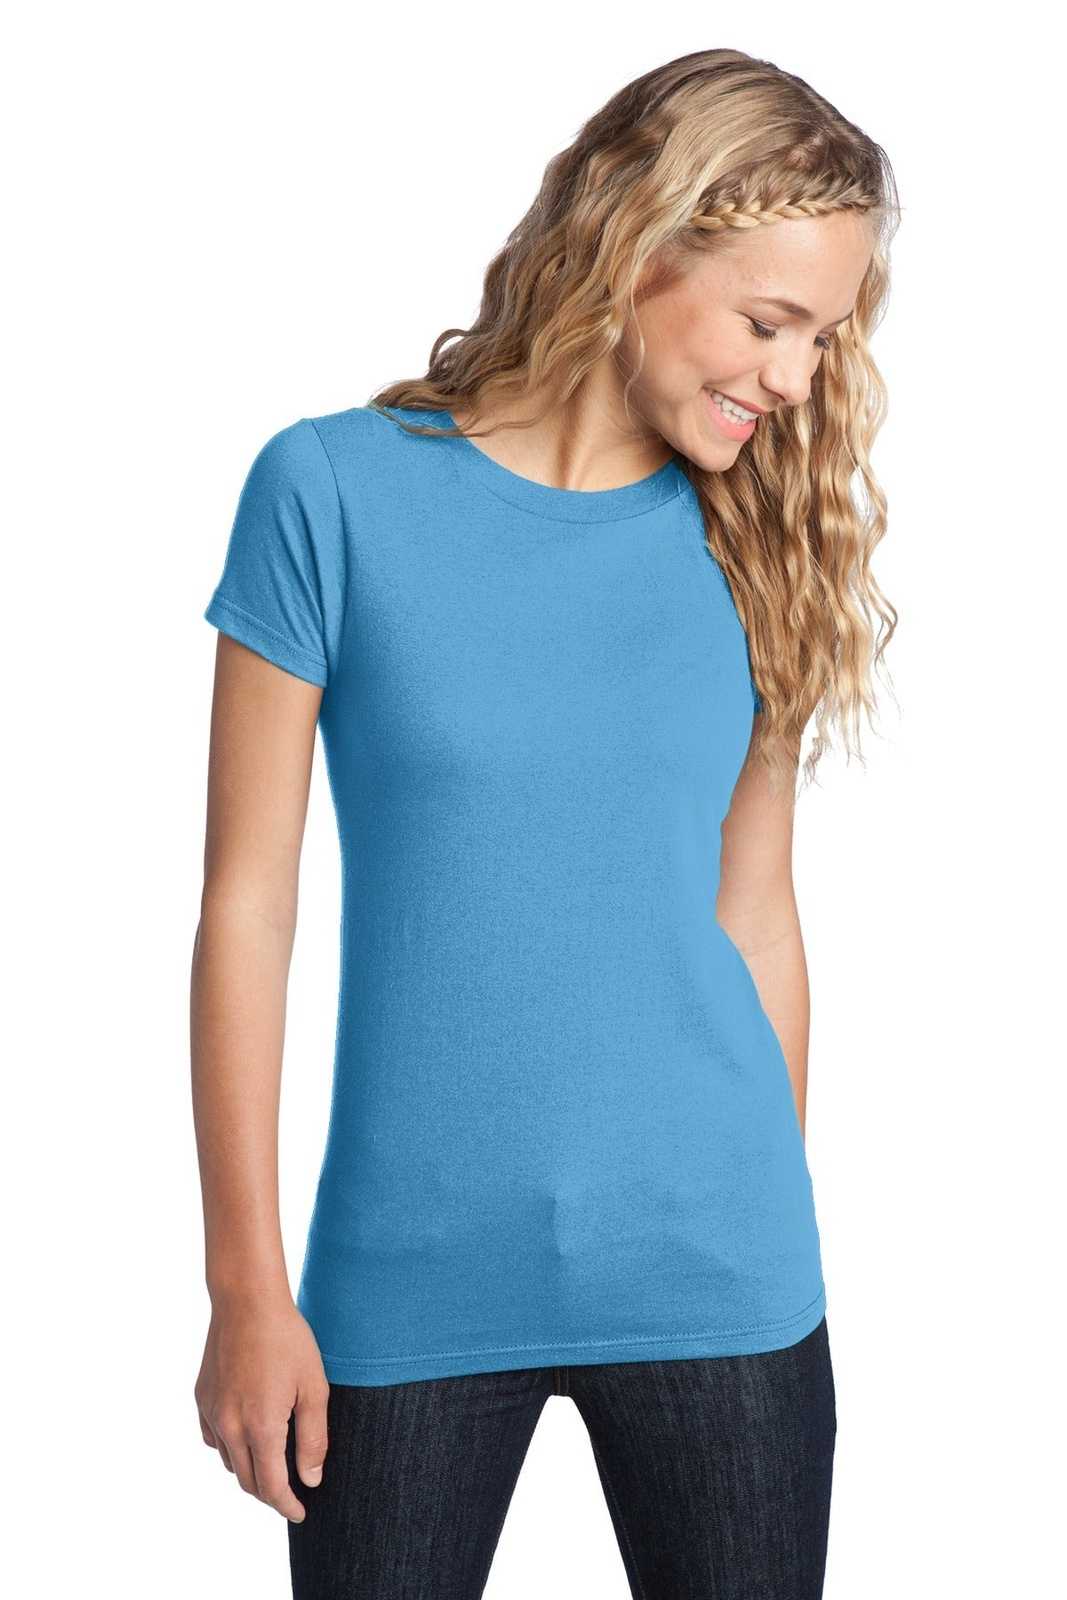 District DT5001 Women's Fitted The Concert Tee - Aquatic Blue - HIT a Double - 1